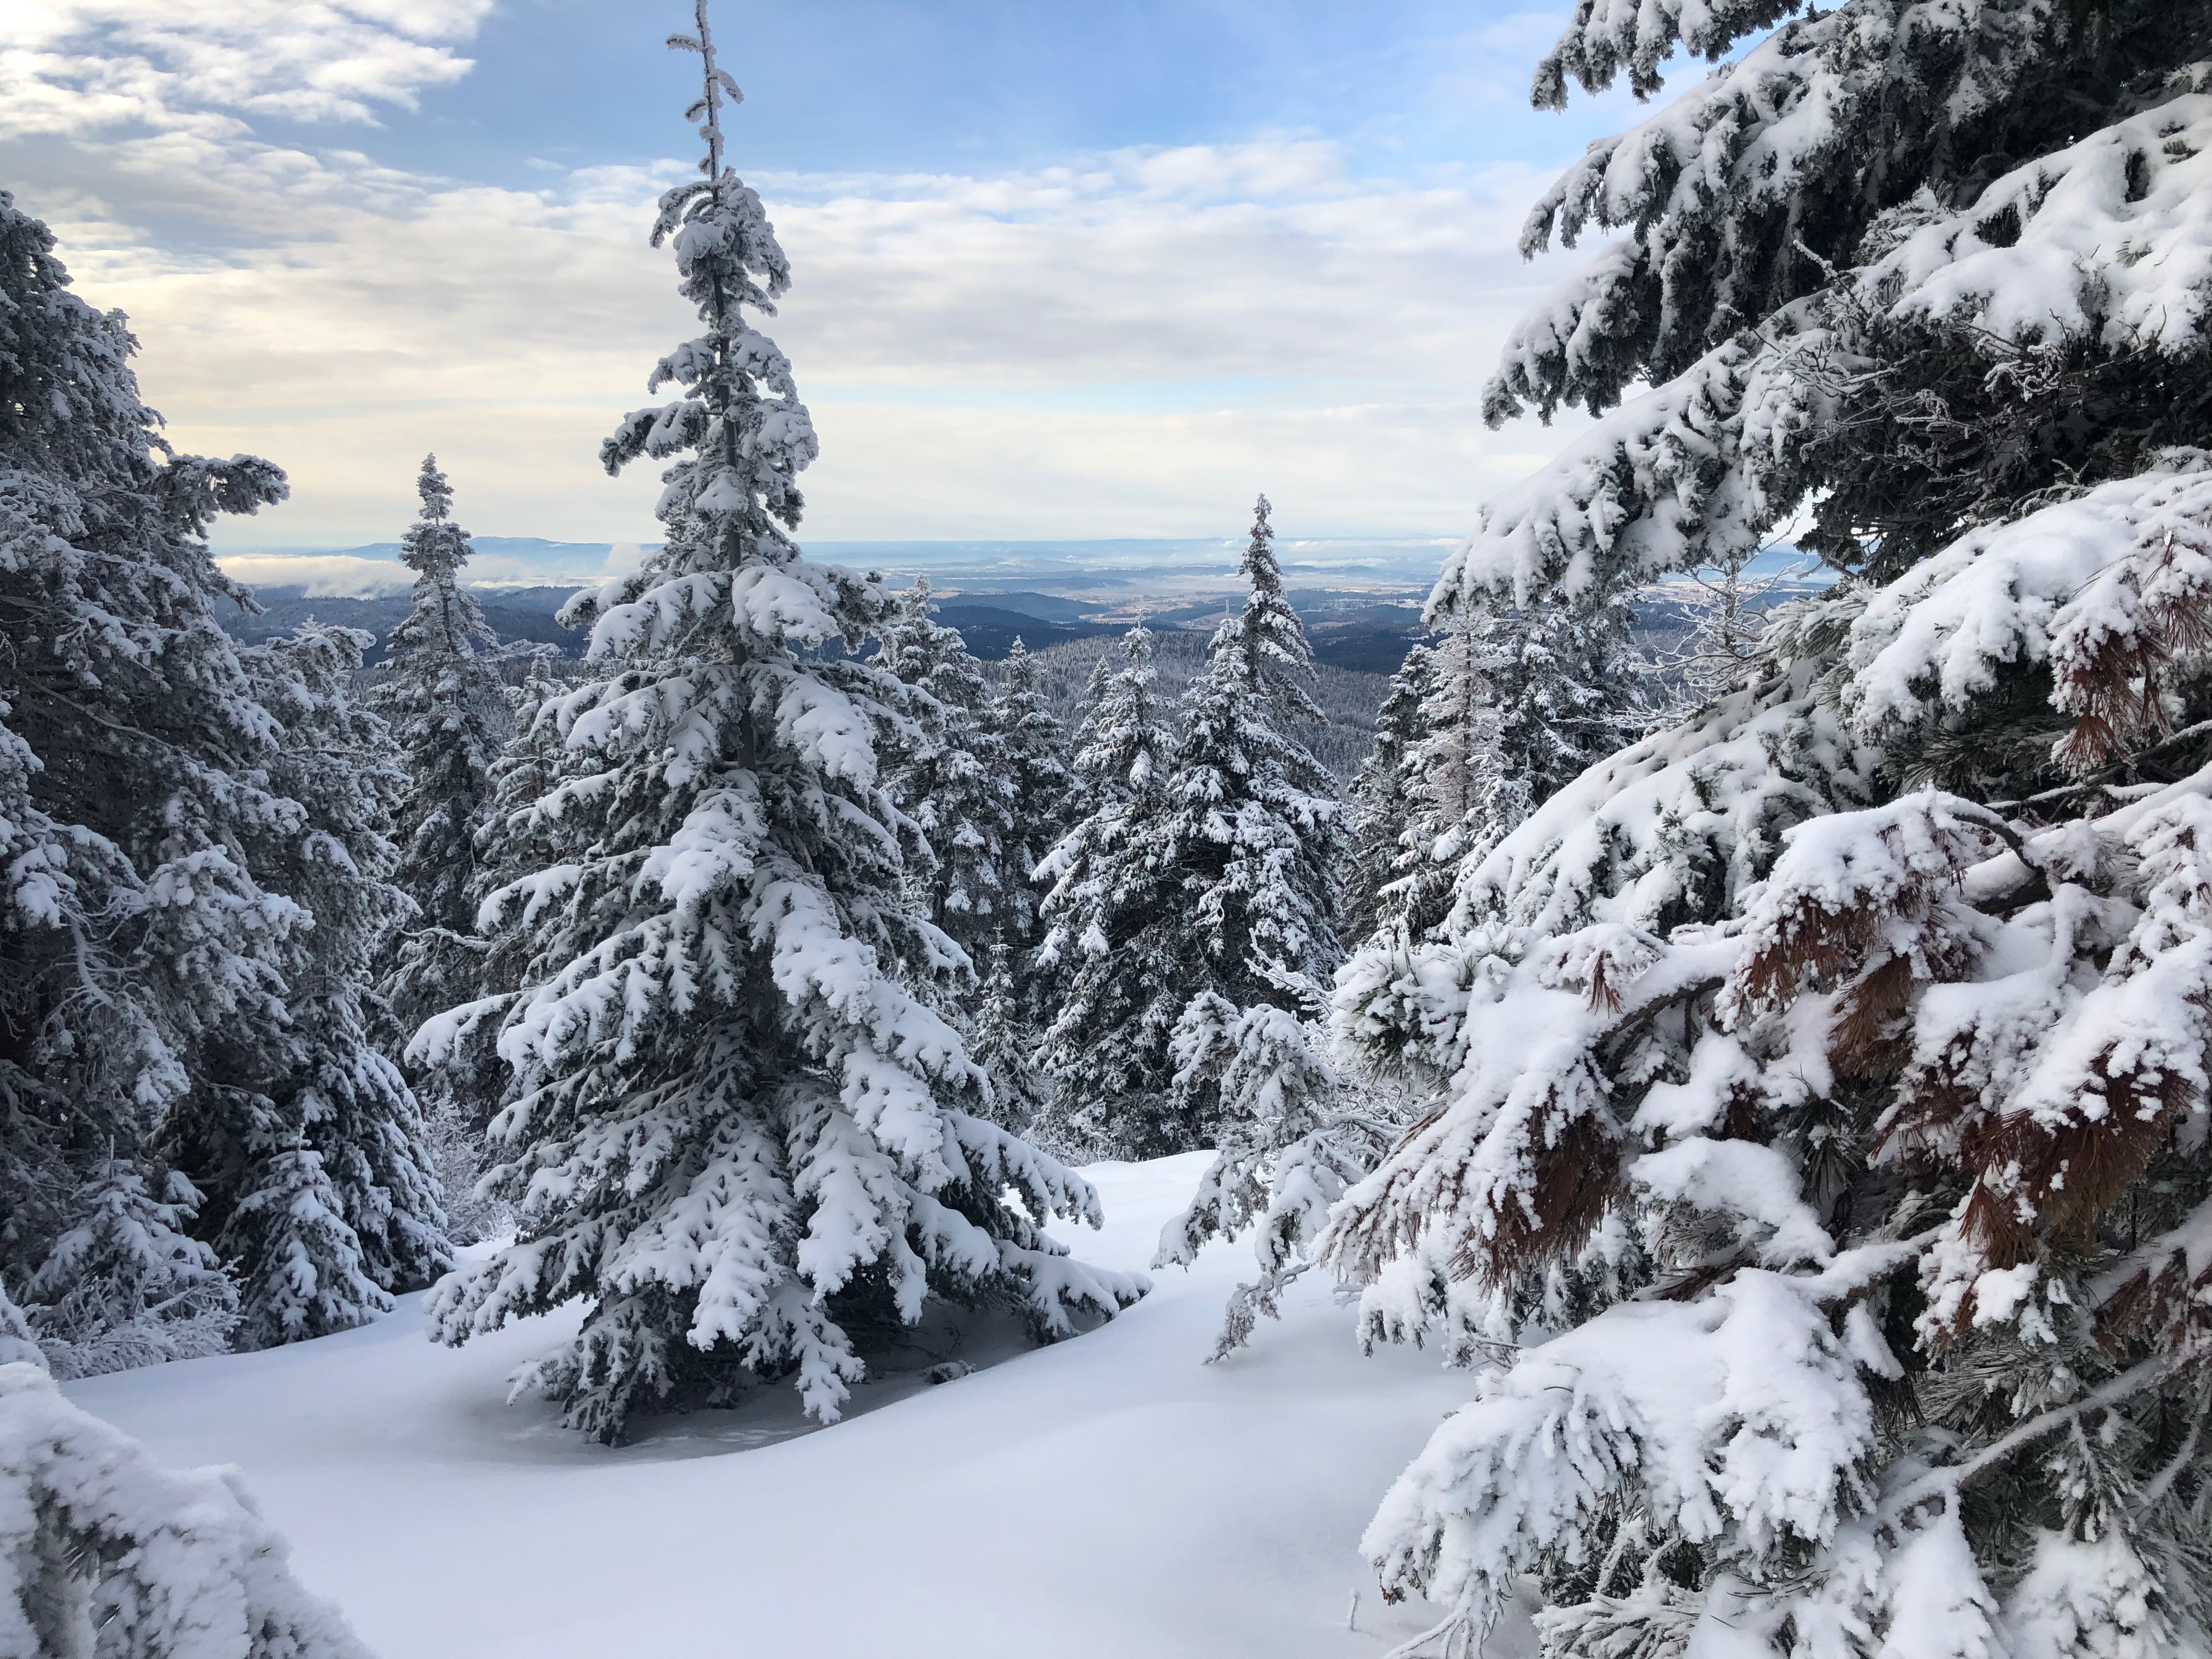 A photo of a snowy day with lots of pine trees in the foreground covered with fluffy snow and  blue skies with some clouds. Behind all the trees are rolling holls in various blue tones and lots of snow.